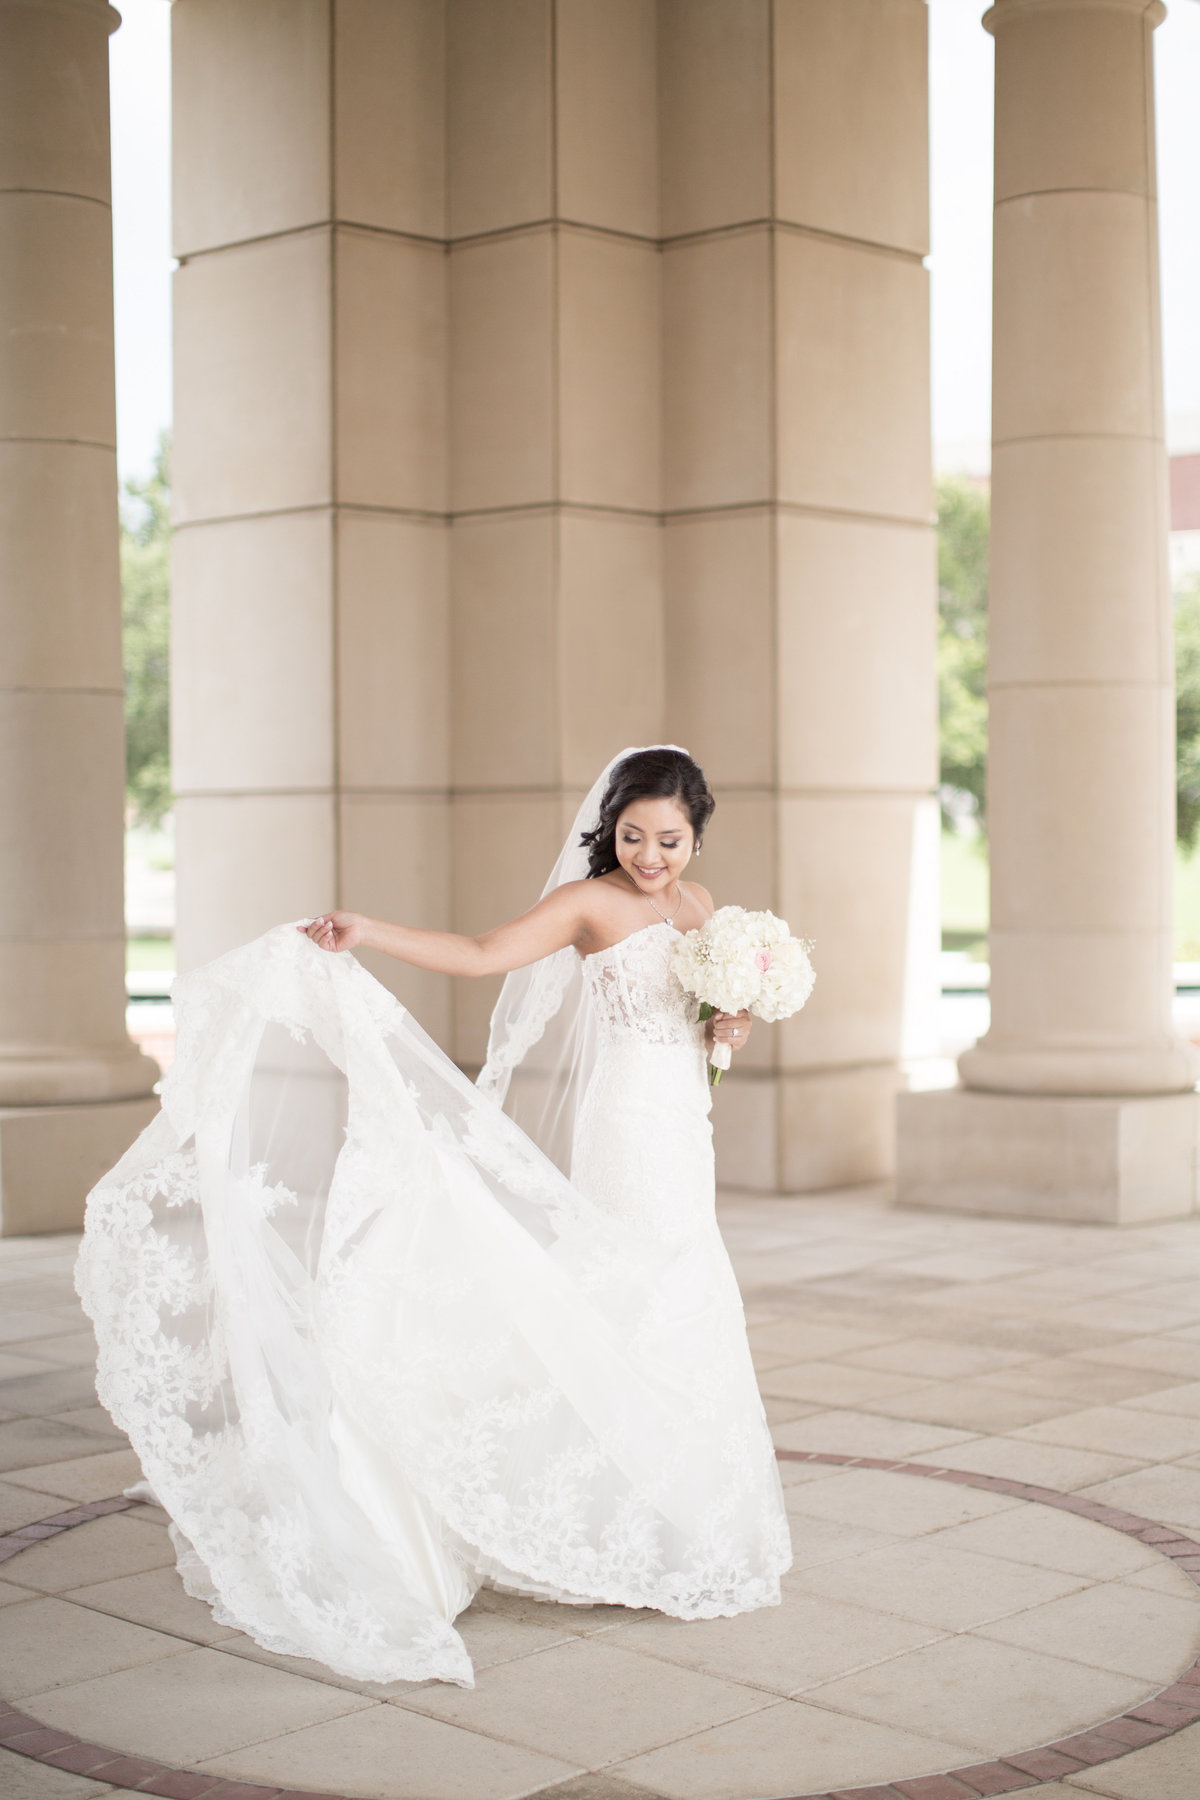 A bride twirls and watches her dress at The Moulton Bell Tower on the campus of The University of South Alabama in Mobile, Alabama.